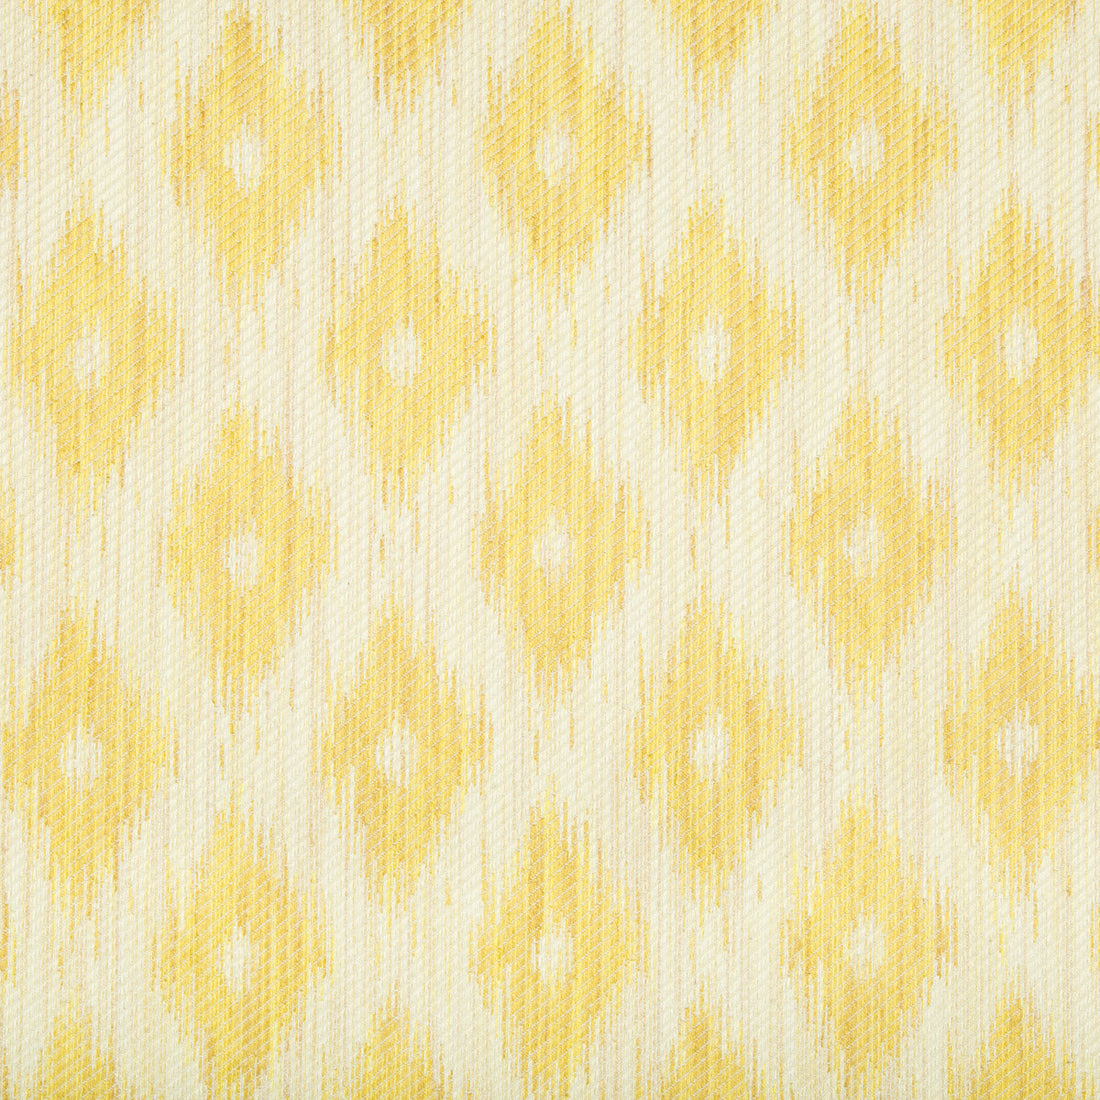 Viceroy Strie II fabric in canary color - pattern 8017139.40.0 - by Brunschwig &amp; Fils in the Baronet collection